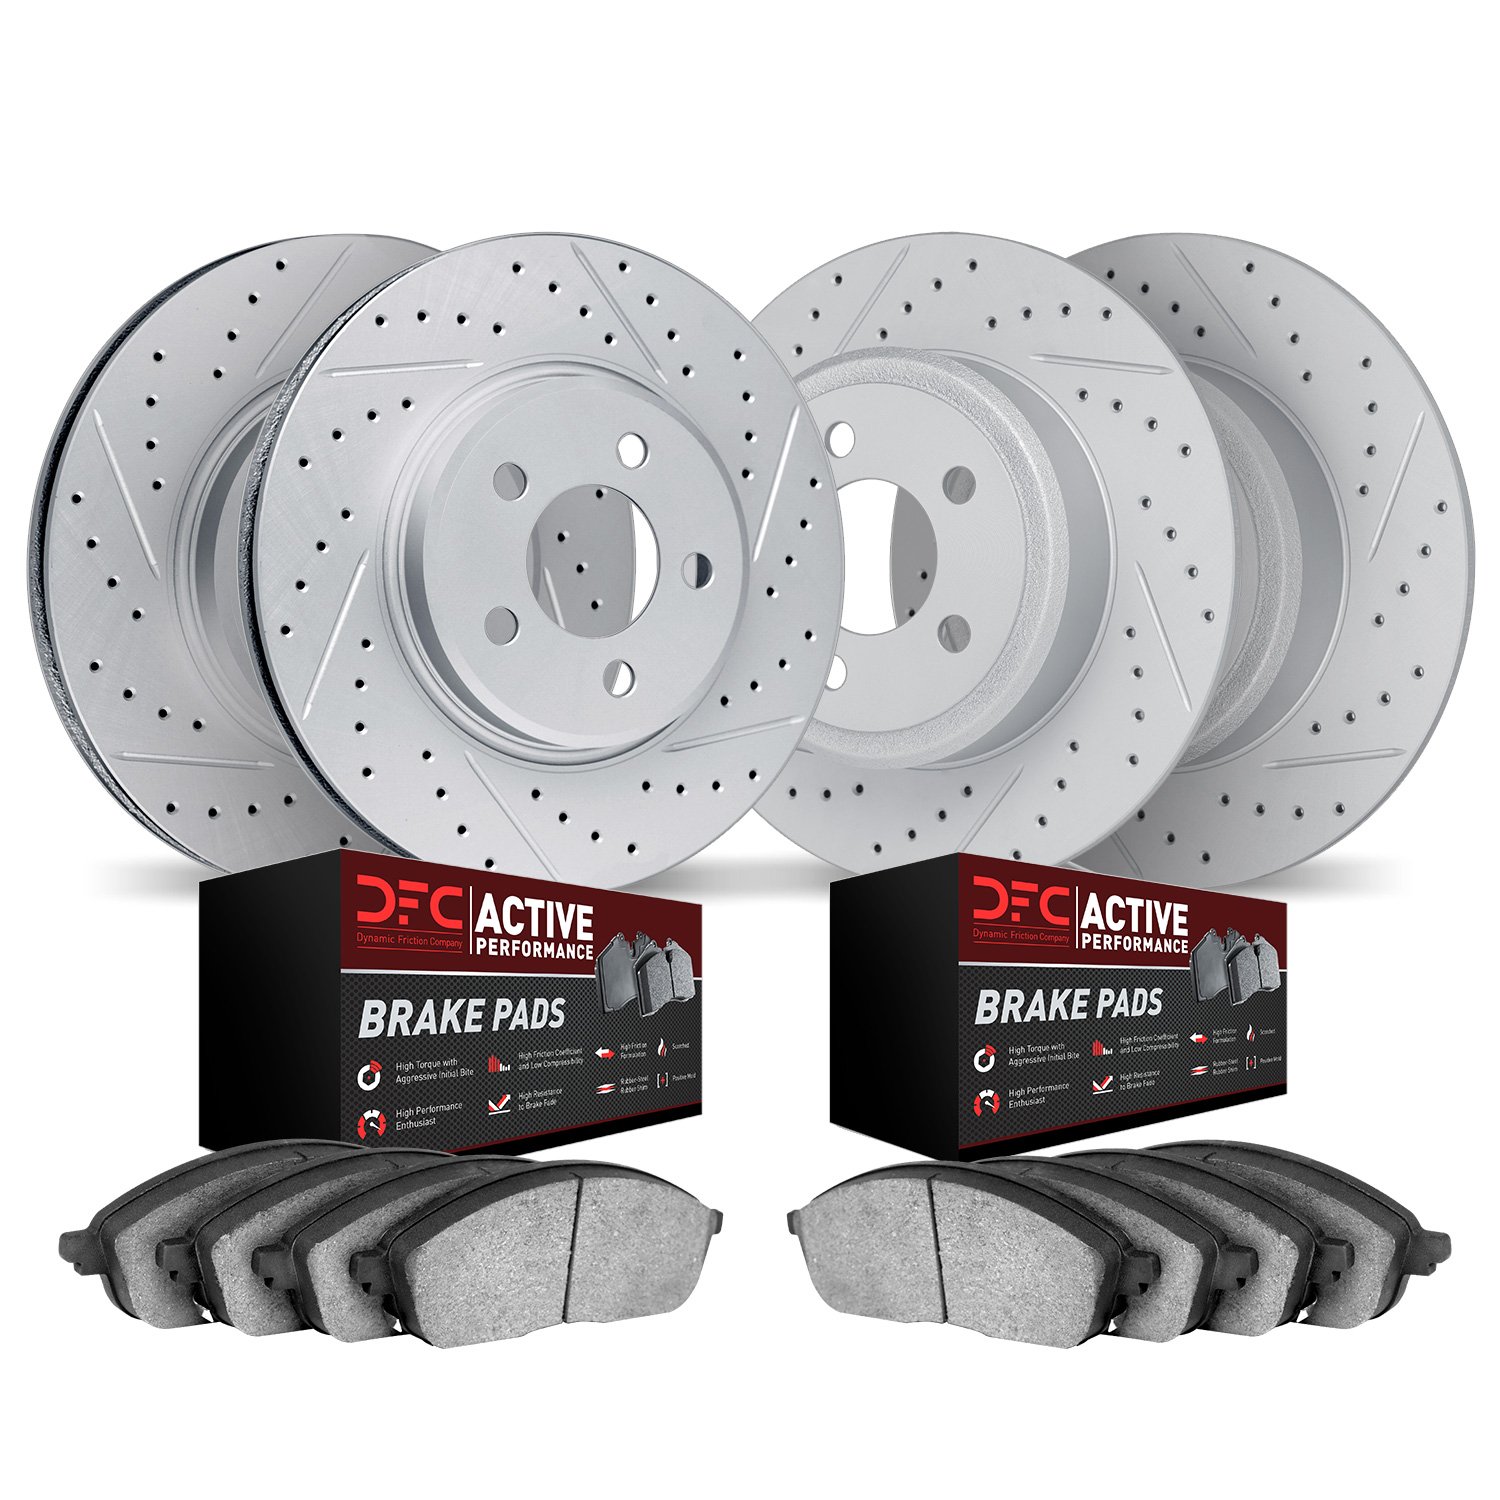 2704-27005 Geoperformance Drilled/Slotted Brake Rotors with Active Performance Pads Kit, 2004-2013 Volvo, Position: Front and Re